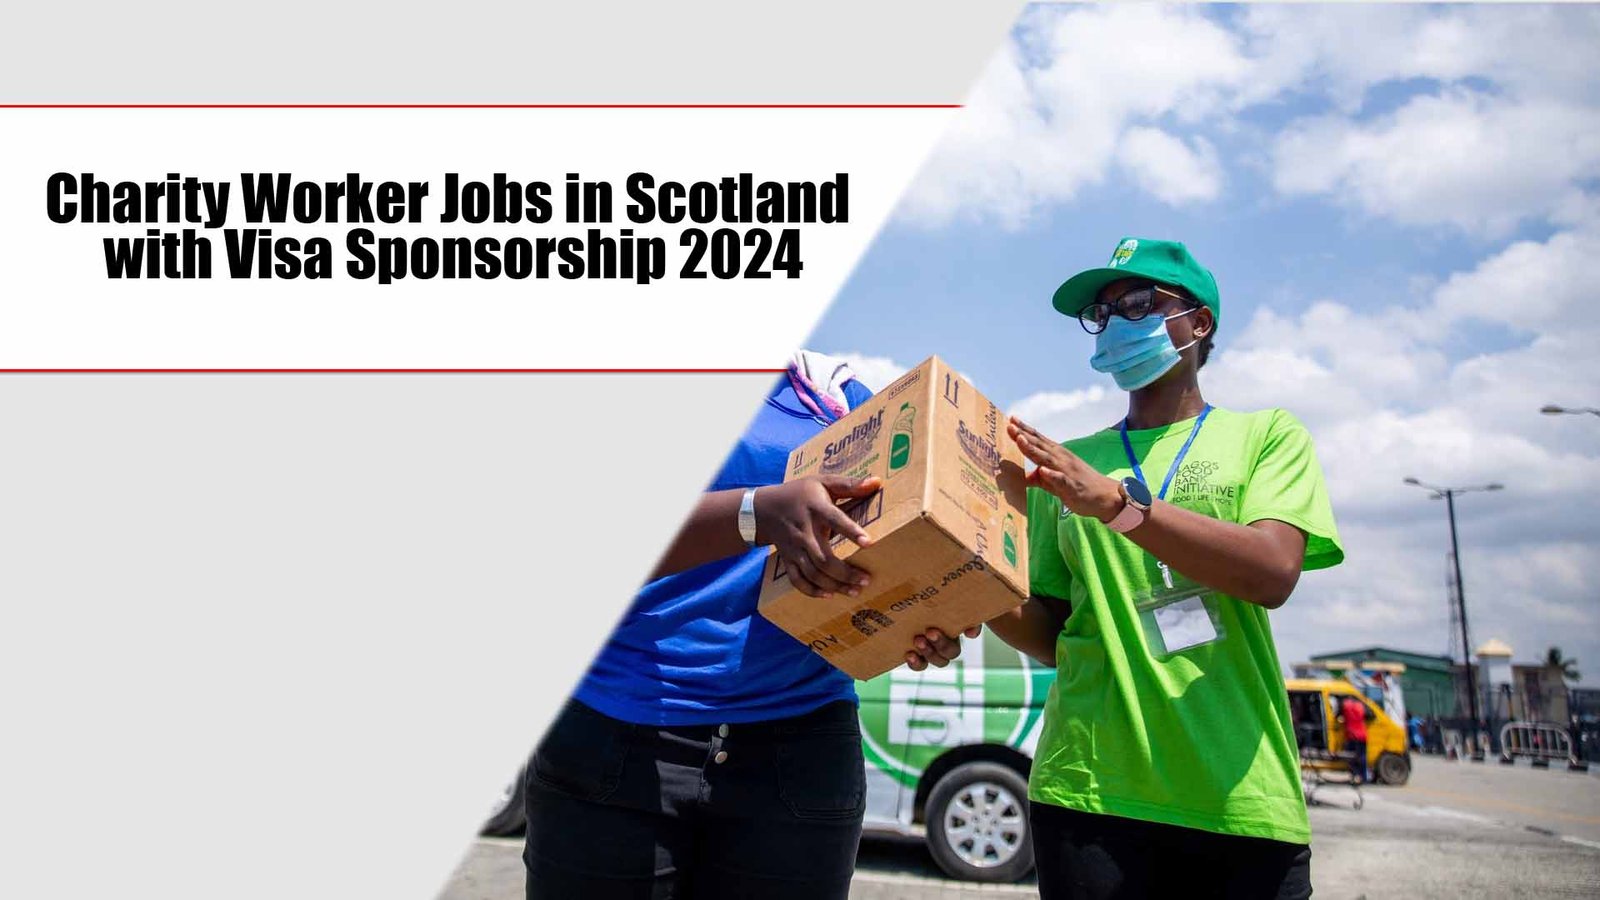 Charity Worker Jobs in Scotland with Visa Sponsorship 2024